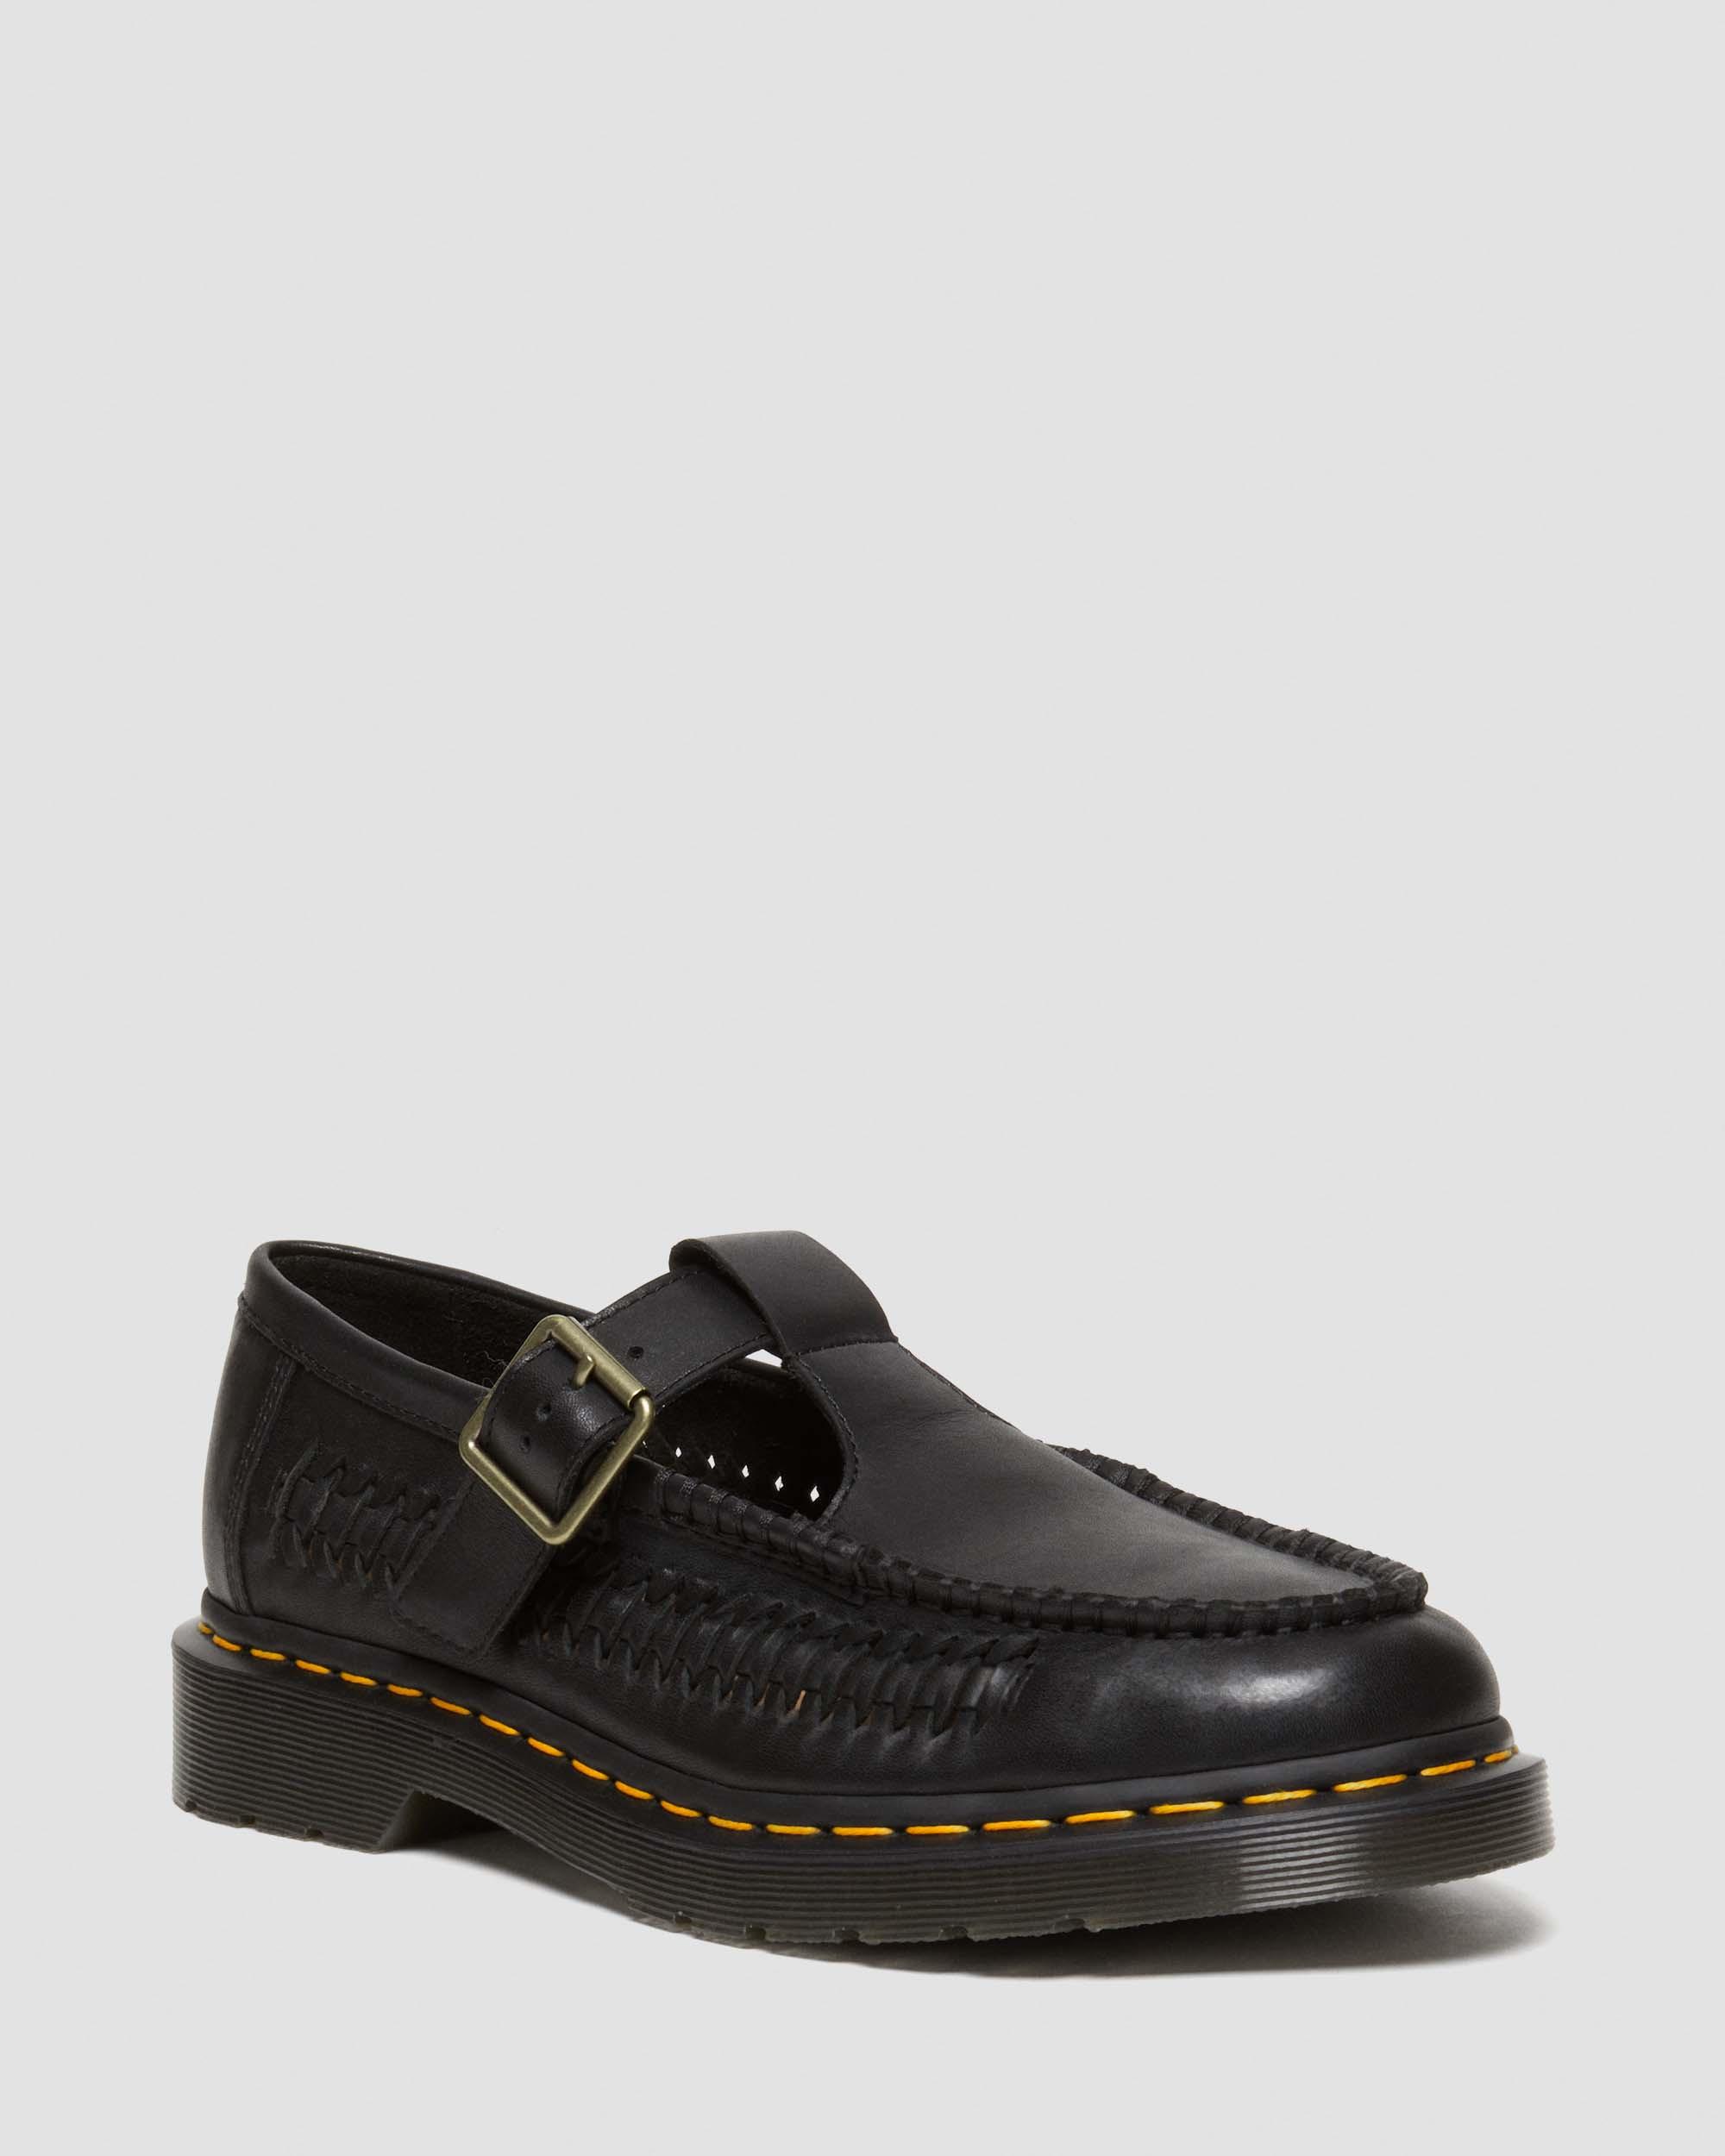 Adrian T-Bar Leather Mary Jane Shoes in Black | Dr. Martens